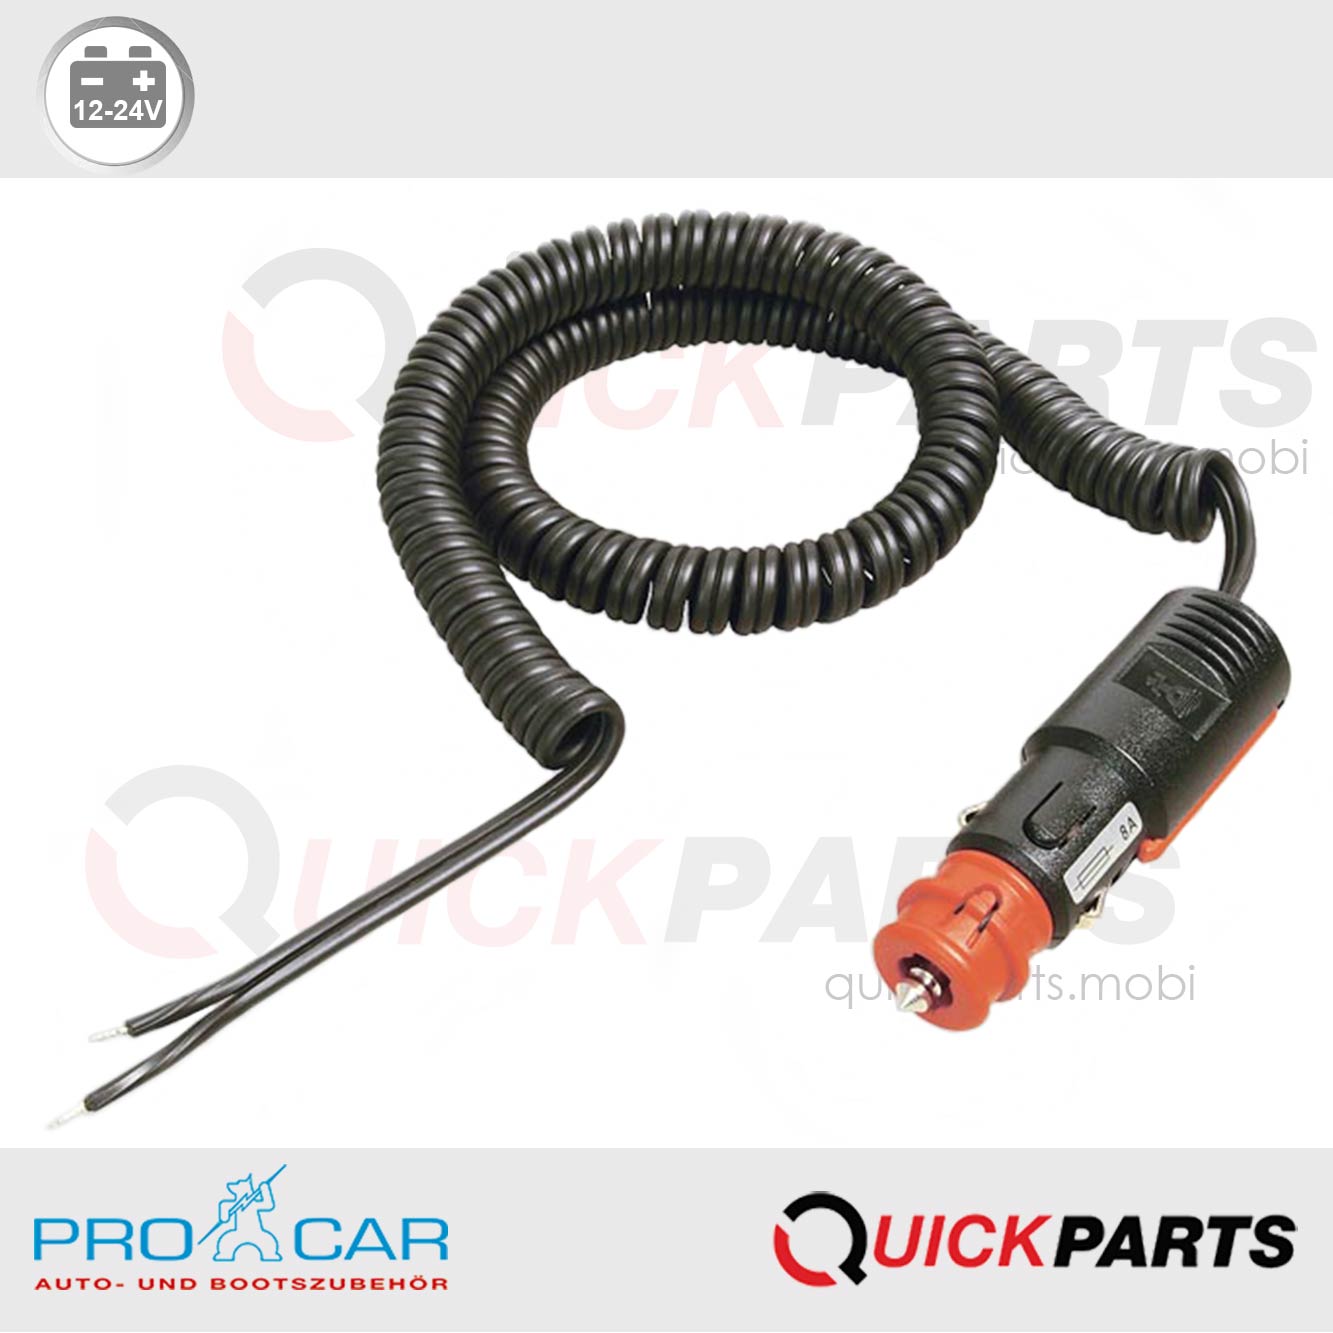 Helix Cable with plug, PRO CAR 67838000